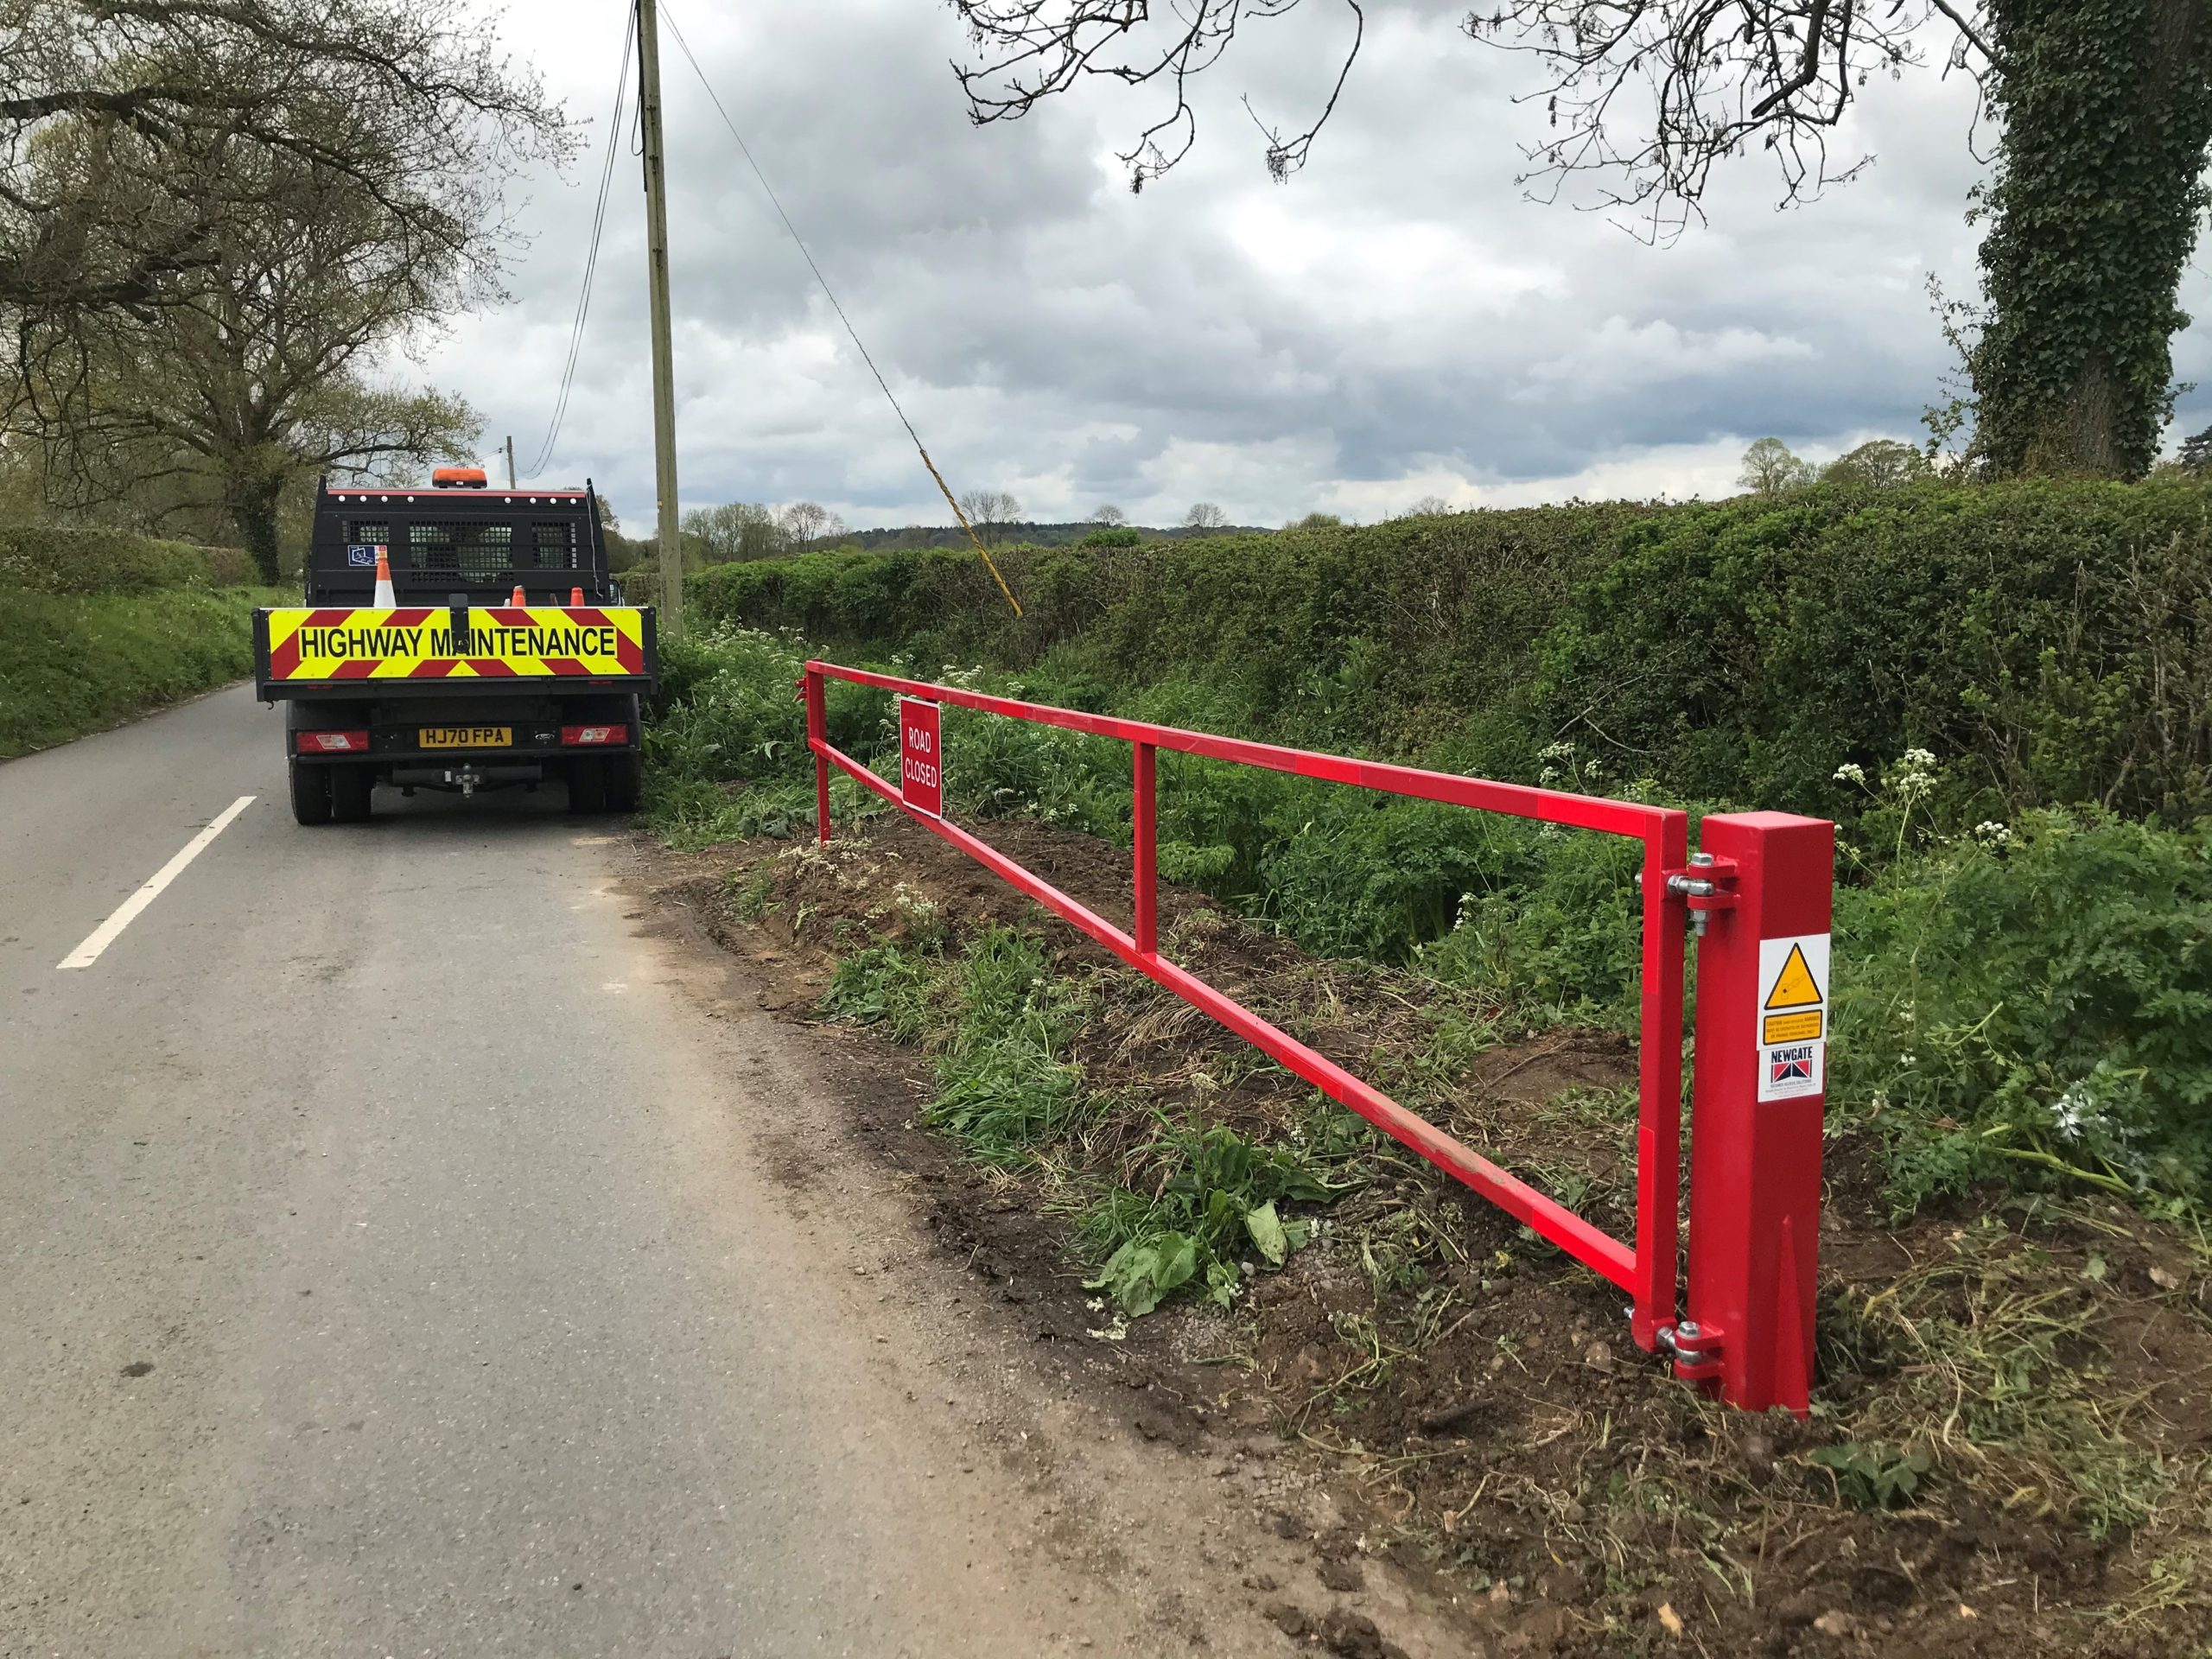 New gates have been installed on the road which cuts through the River Stour in Hammoon near Sturminster Newton